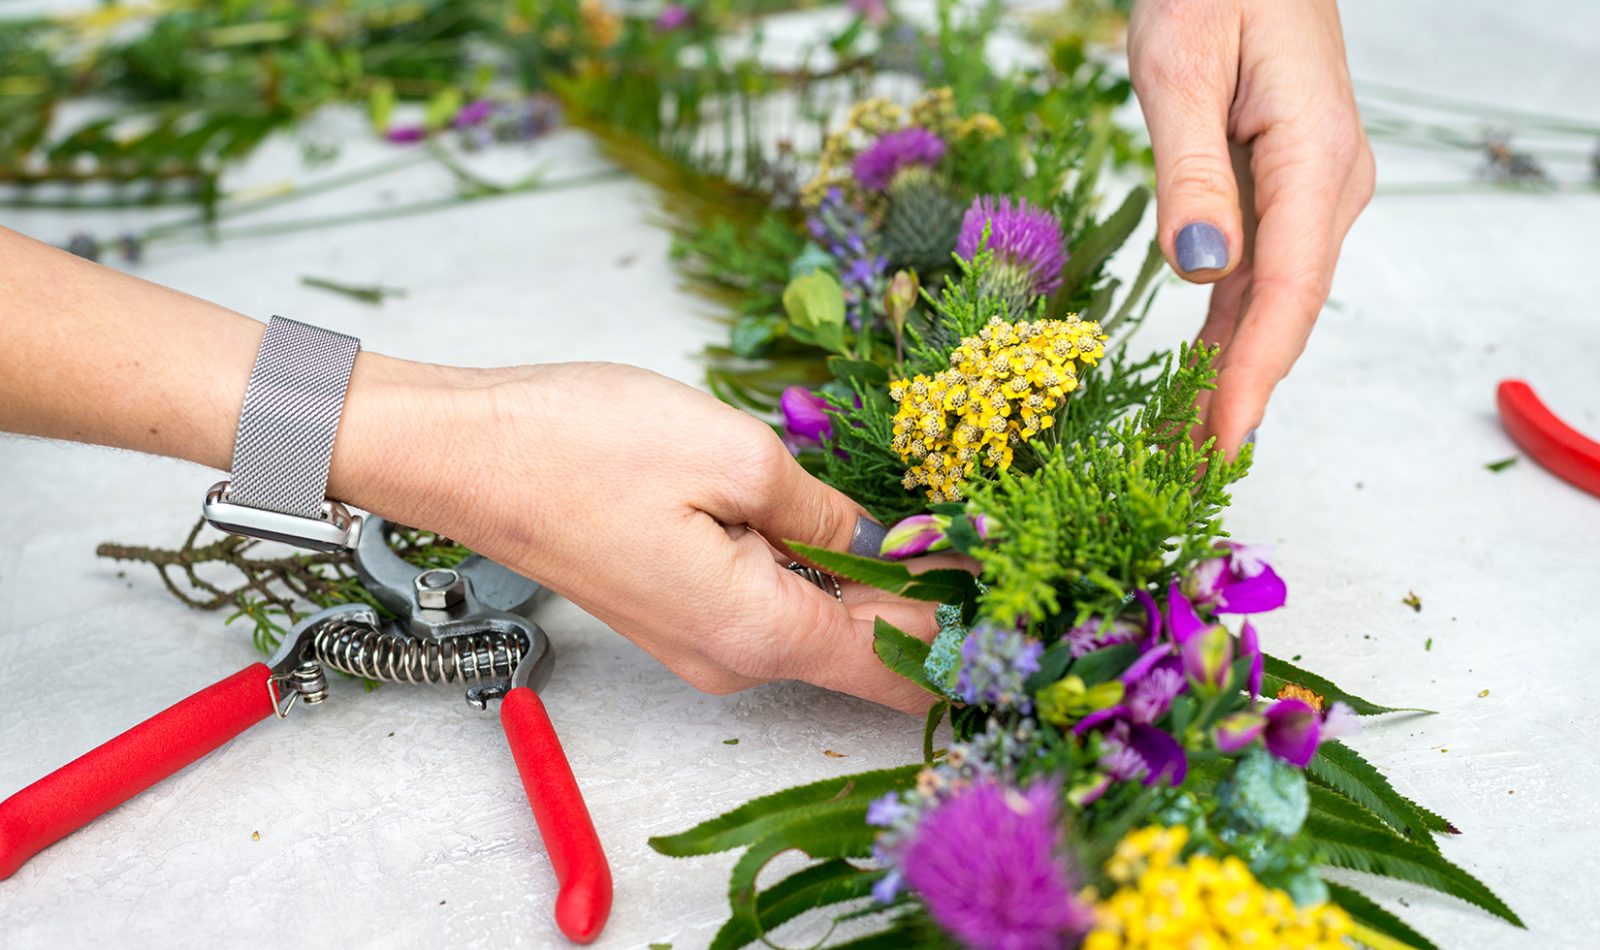 Close-up image of hands placing a yellow flower into a table garland.